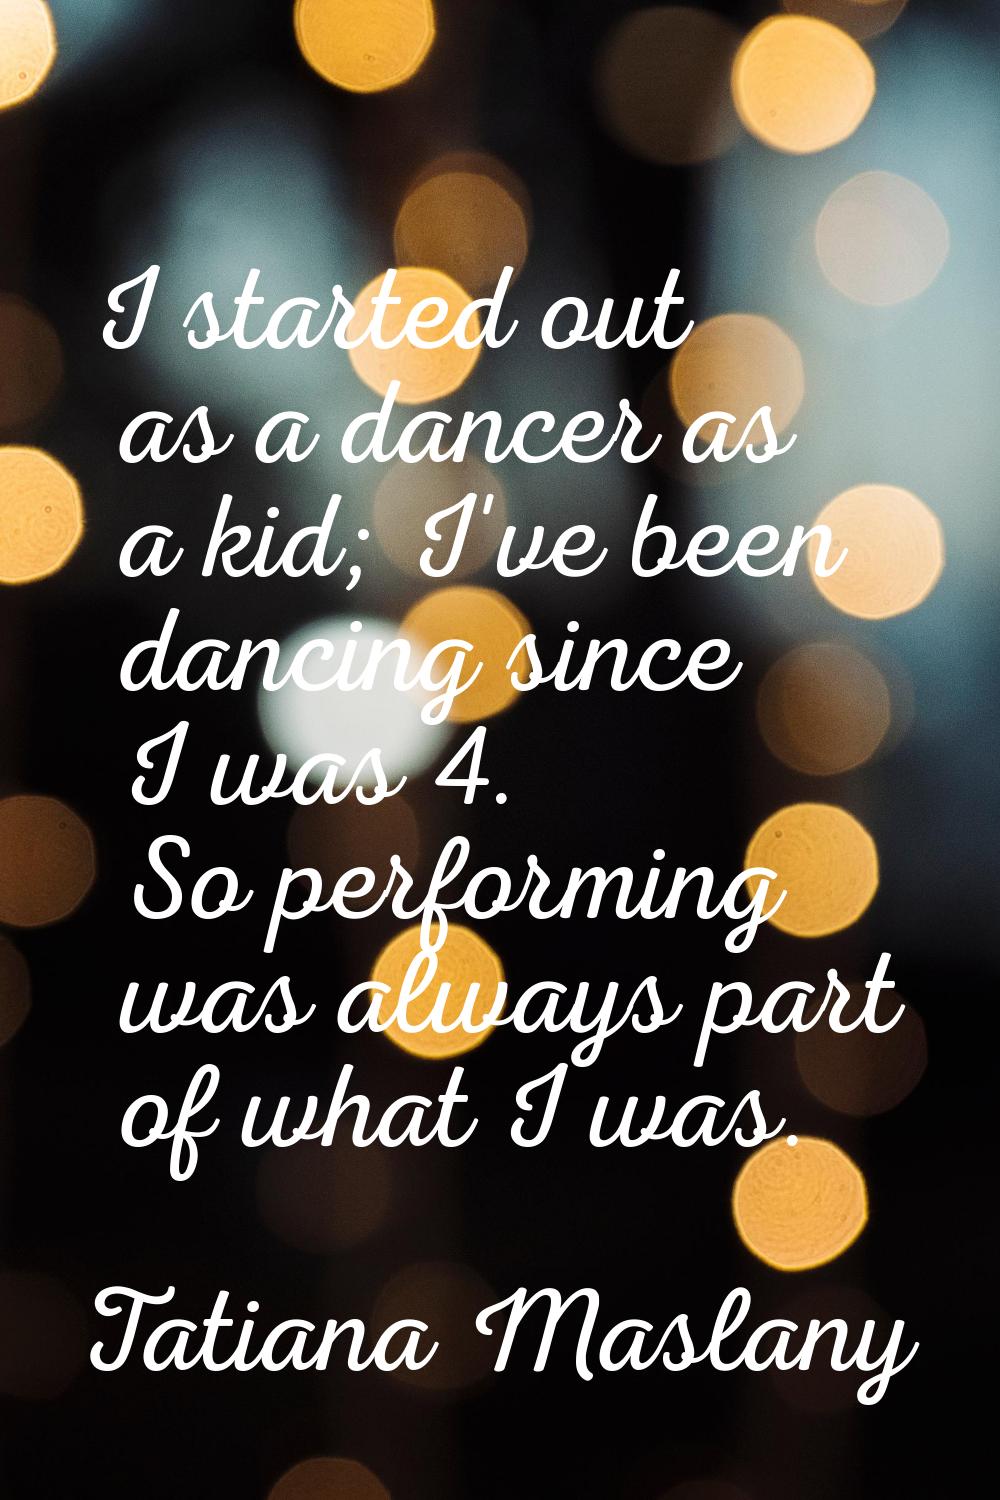 I started out as a dancer as a kid; I've been dancing since I was 4. So performing was always part 